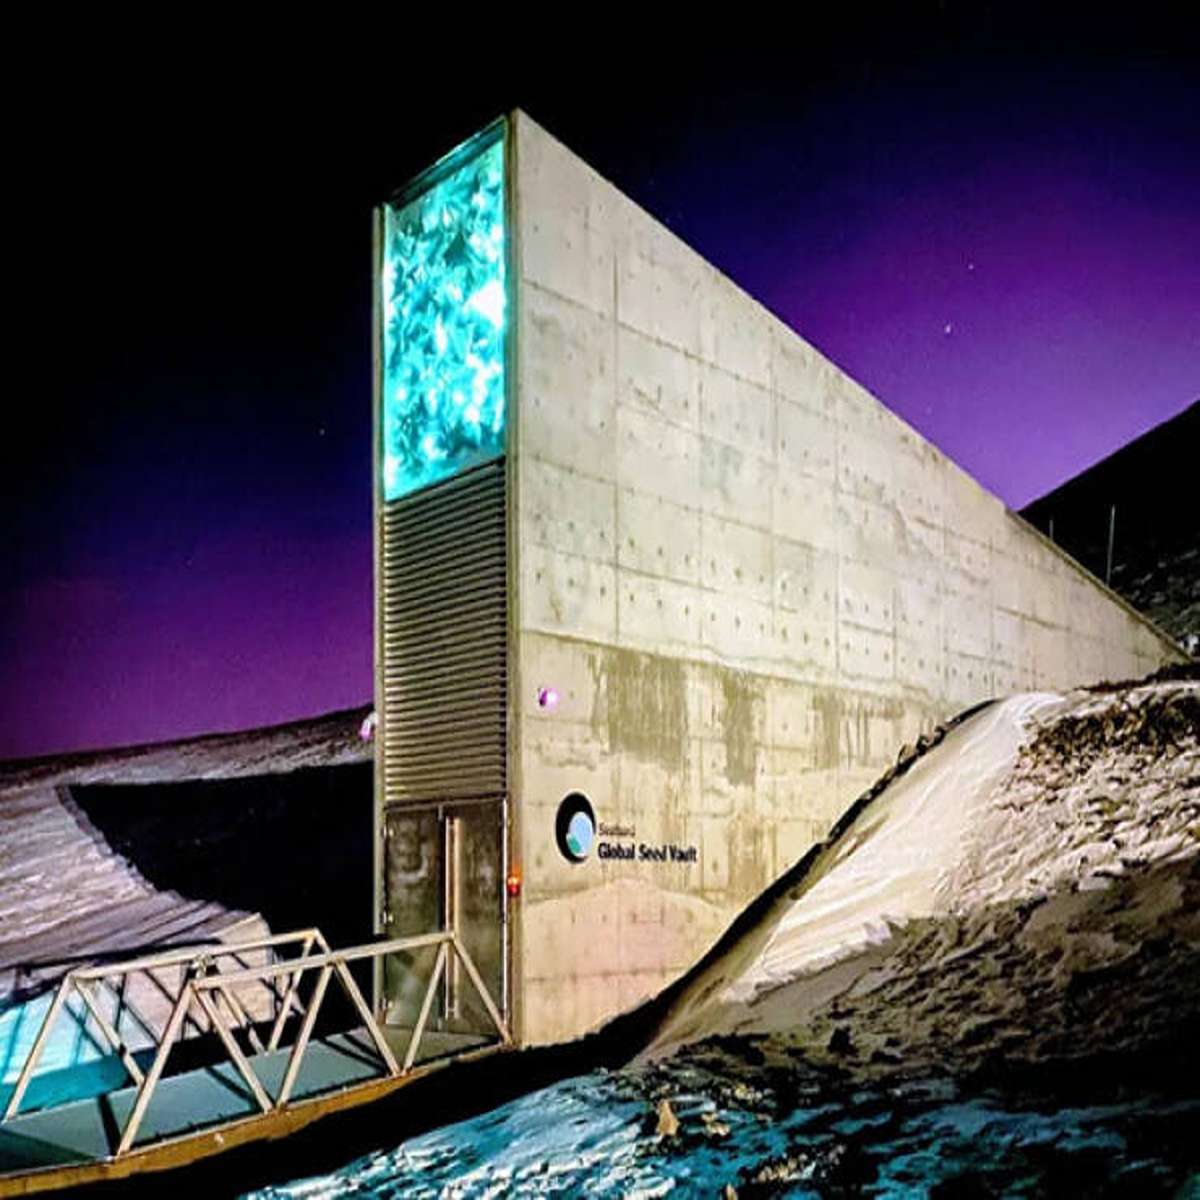 The Svalbard Global Seed Vault also known as the “Doomsday Vault”, is a place in Norway where all of the world’s seeds are kept safe in case of a global catastrophe.